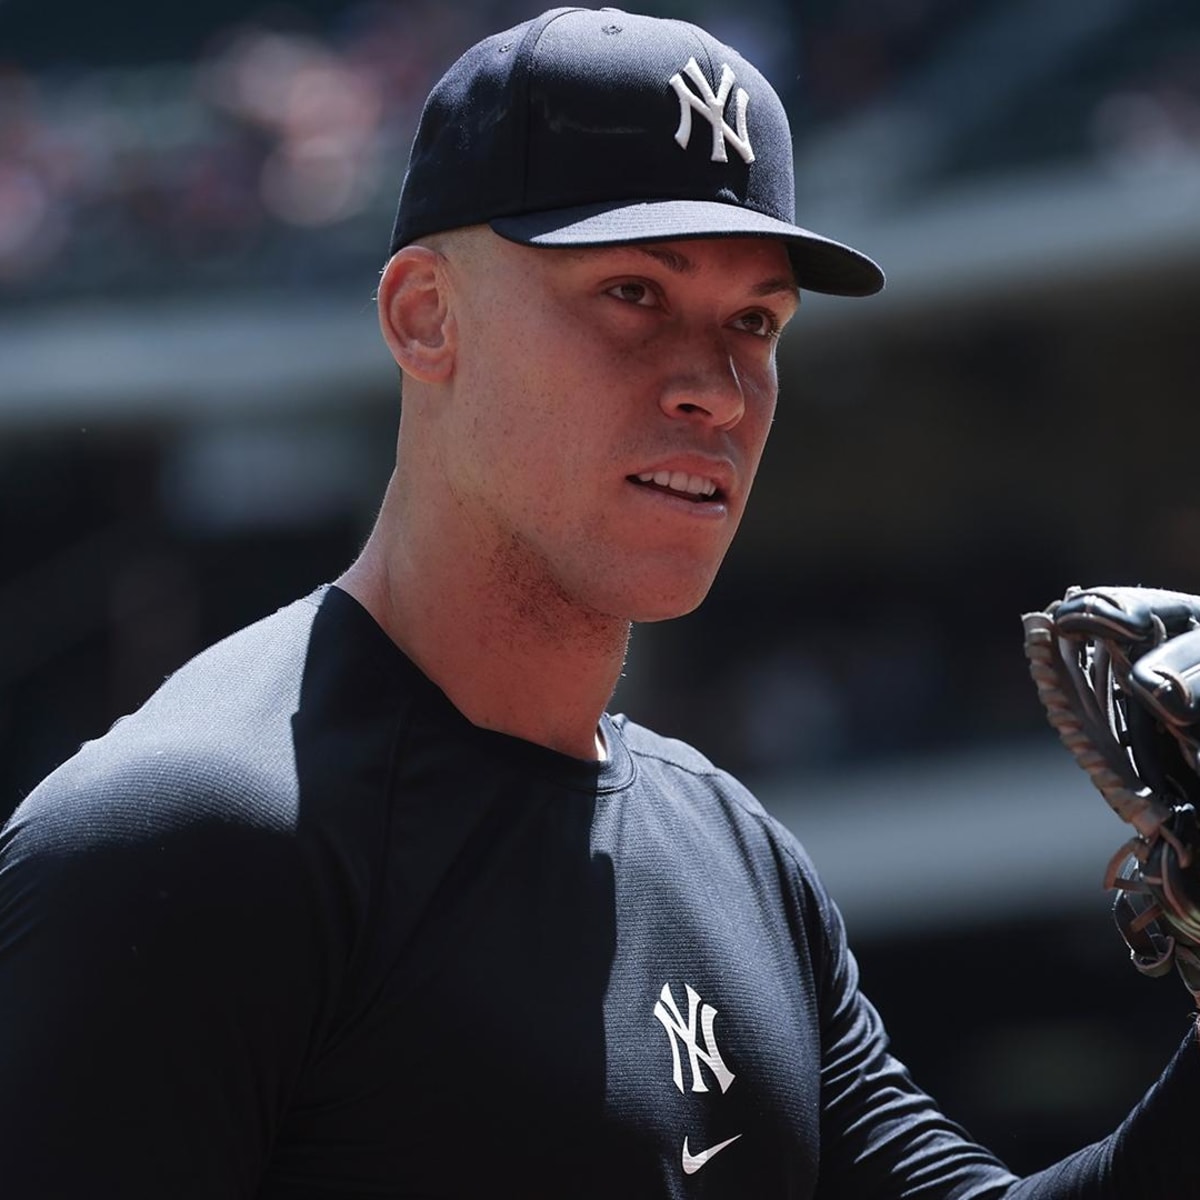 Aaron Judge promises fan he'll hit home run, obviously hits home